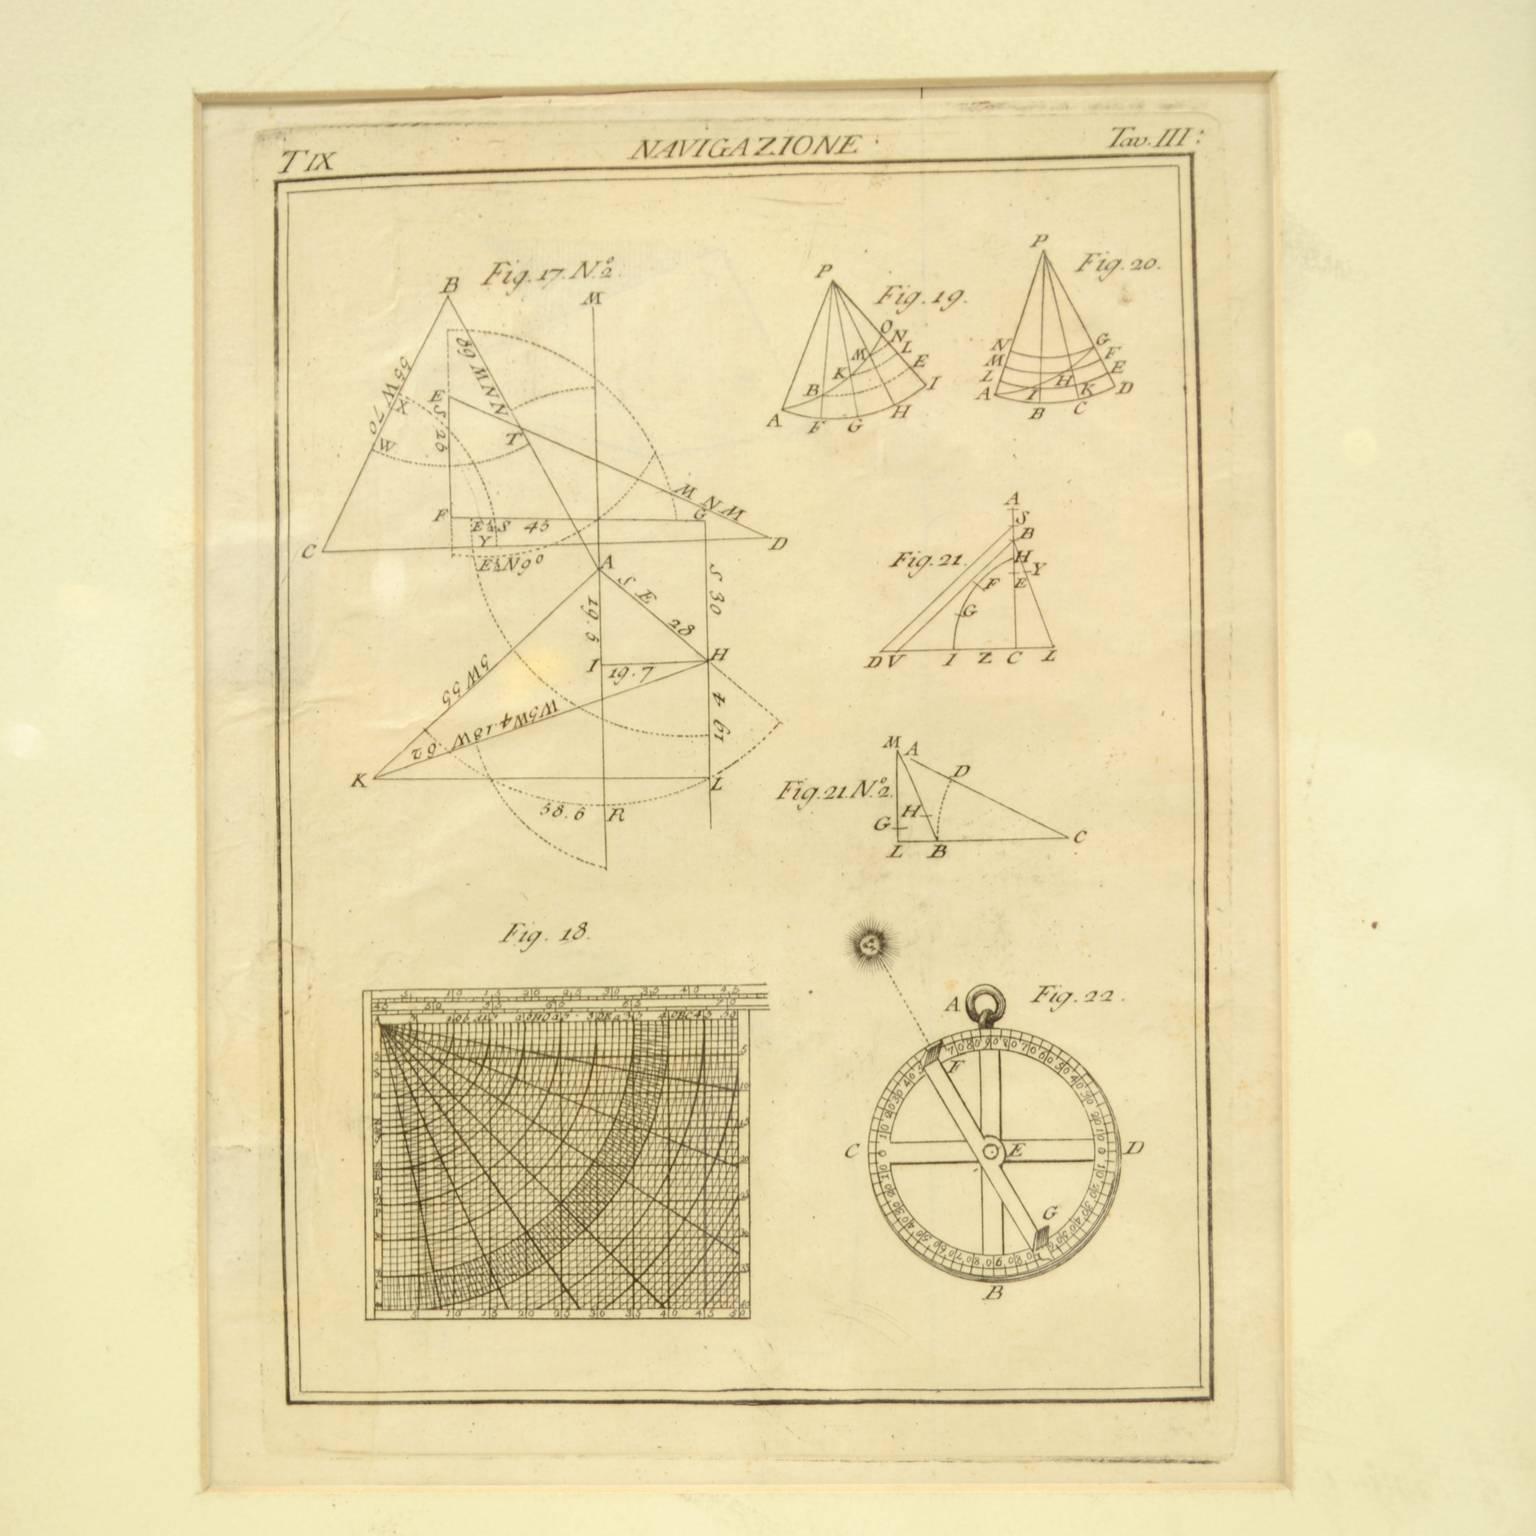 Print by engraving on copper plate Tav III TIX fig. 17-22 from the volume Navigazione; with frame 28 x 33. Some calculations are depicted. Very good condition.
Shipping is insured by Lloyd's London.